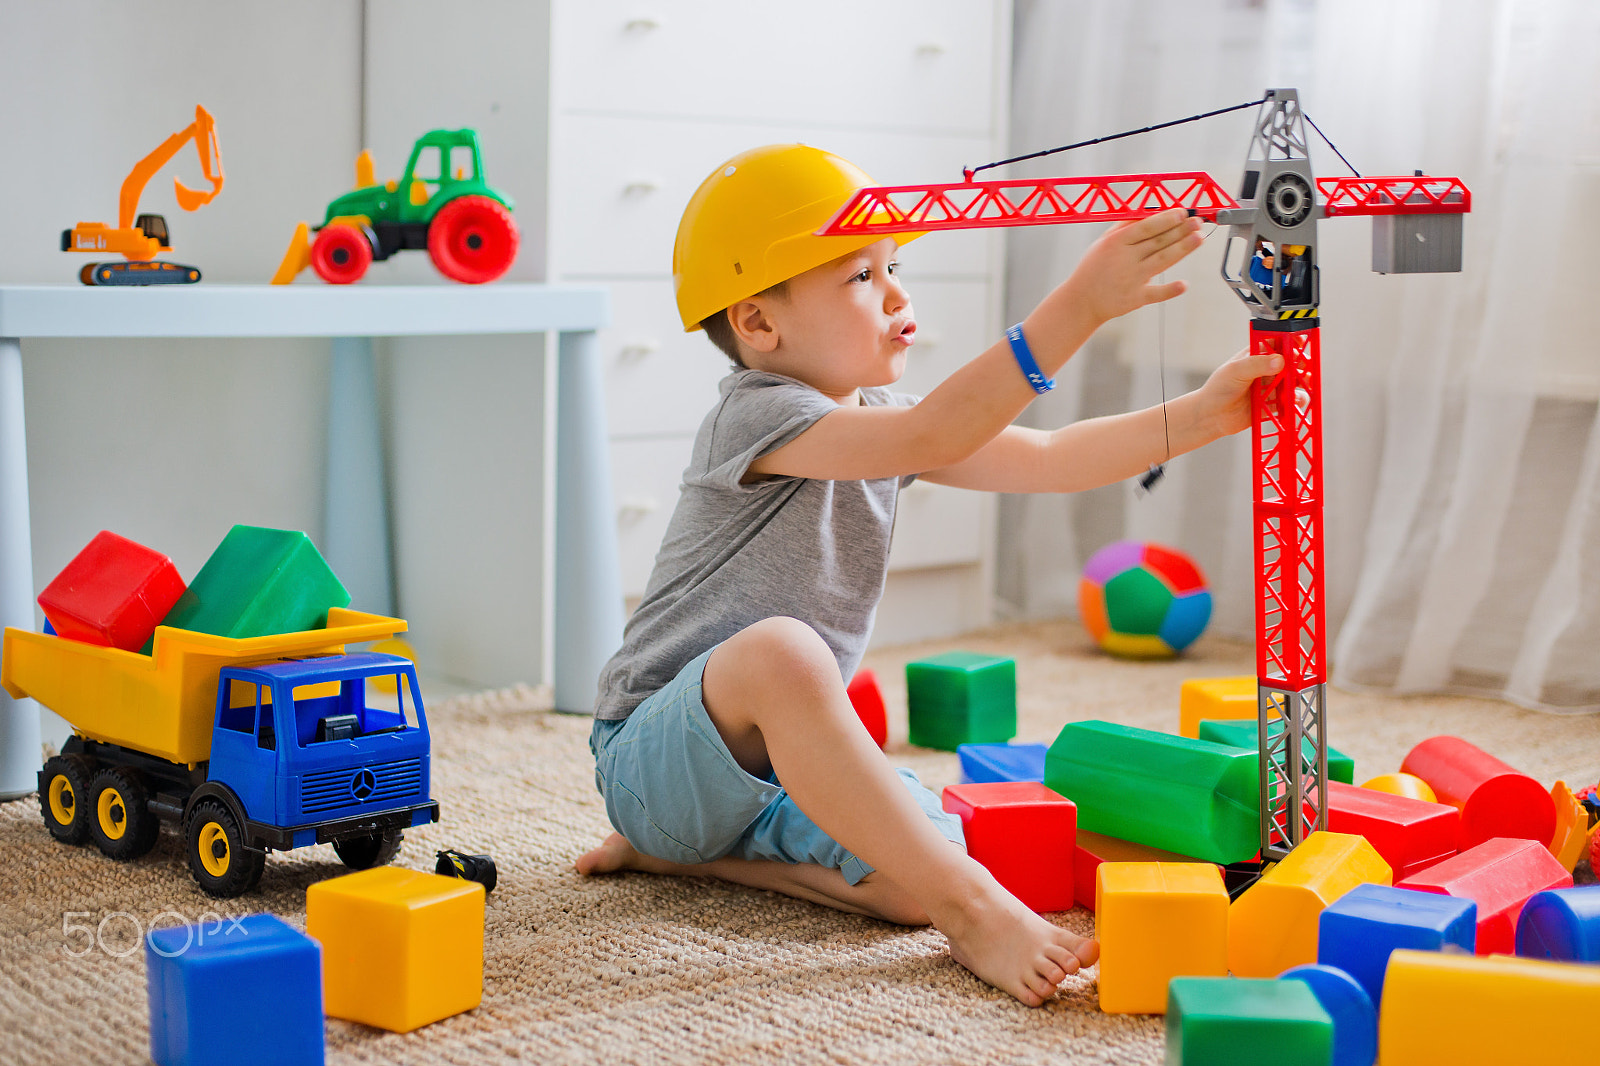 Nikon D800 sample photo. Child plays in the builder in the room photography